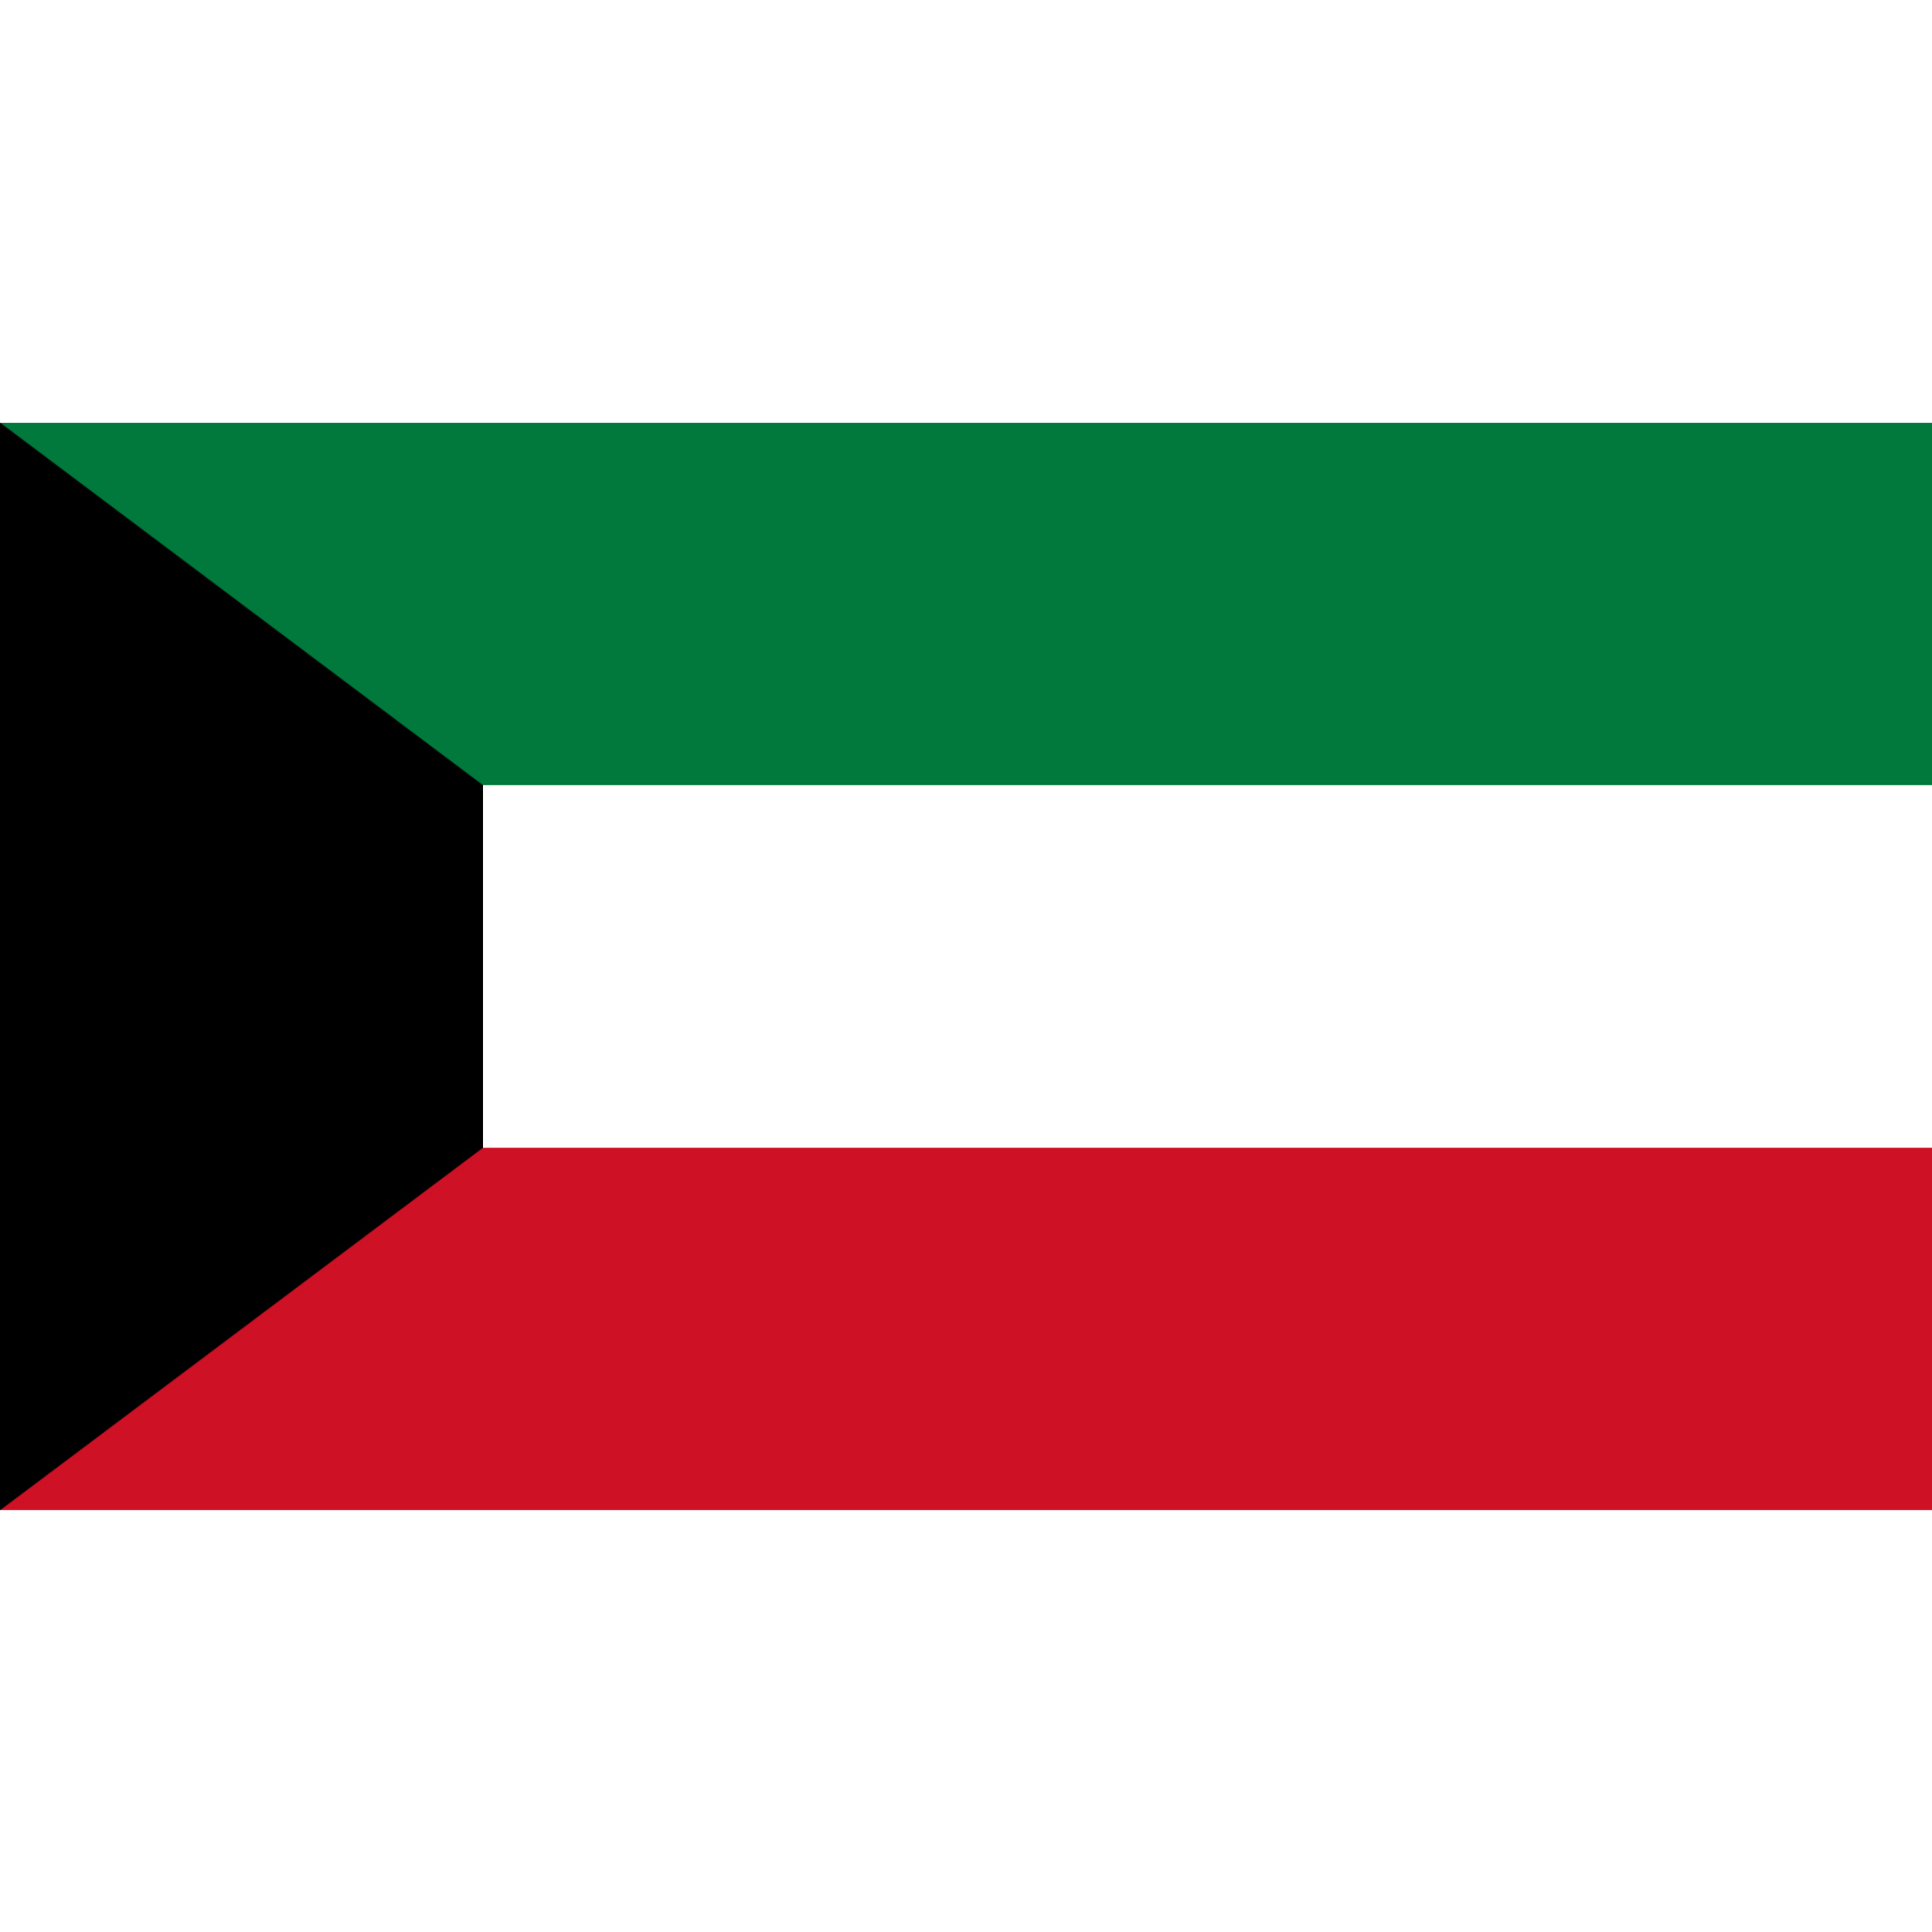 The flag of Kuwait has three horizontal stripes in green, white, and red with a black trapezoid on the left side.